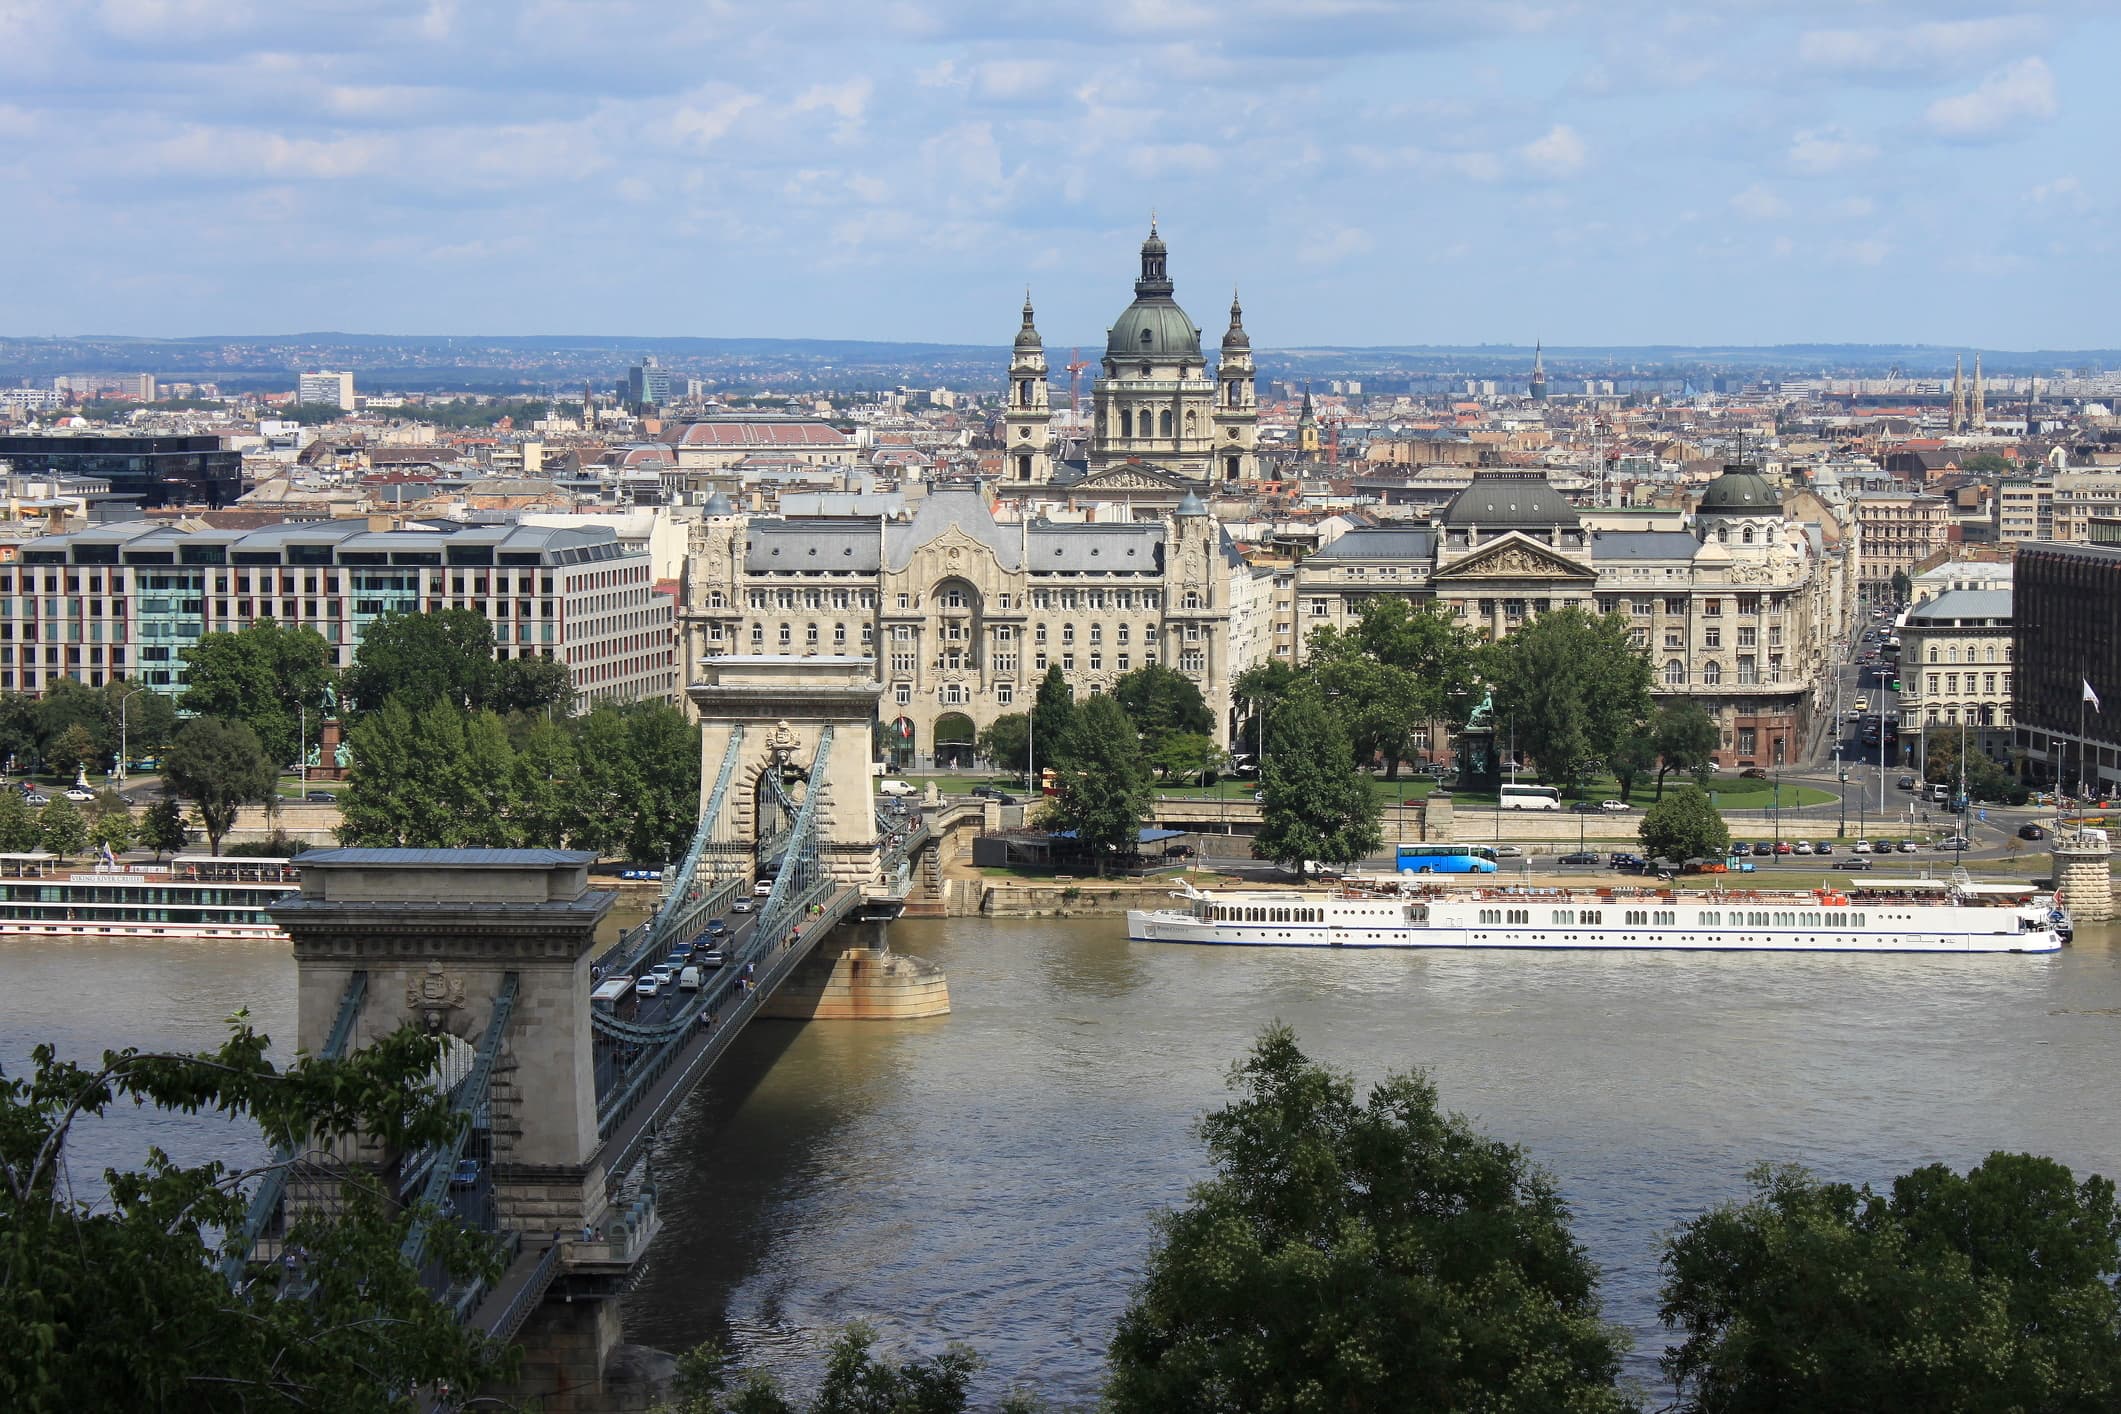 View of the river, chain bridge, and skyline of Budapest, Hungary.